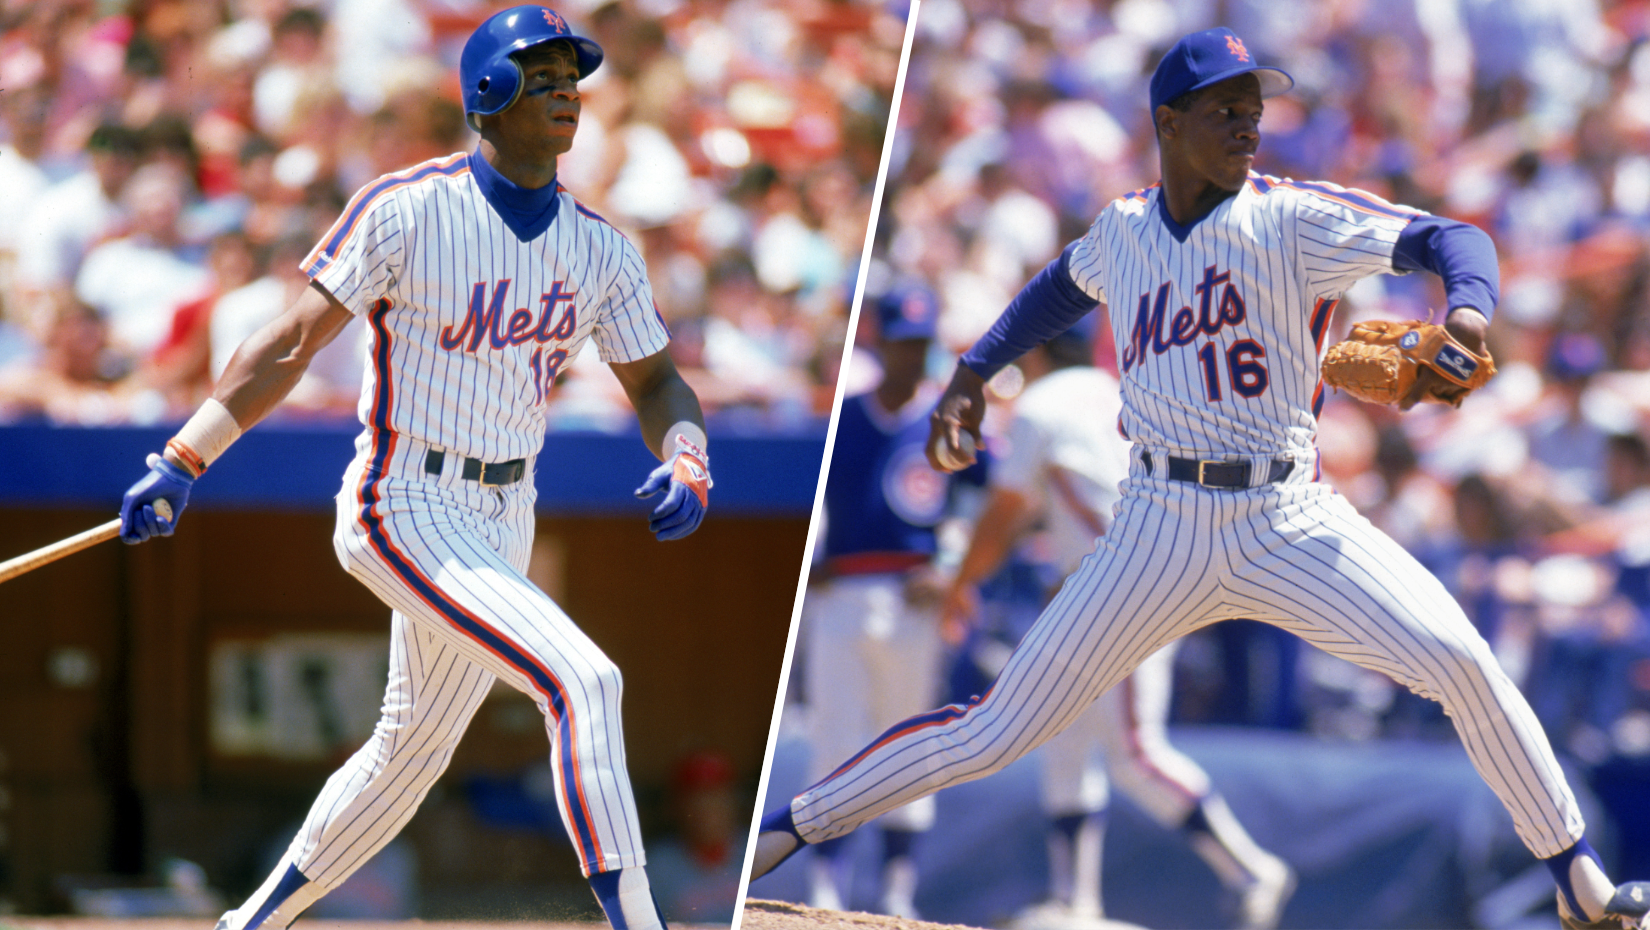 Dwight Gooden playing in Mets Old Timers' Game in August